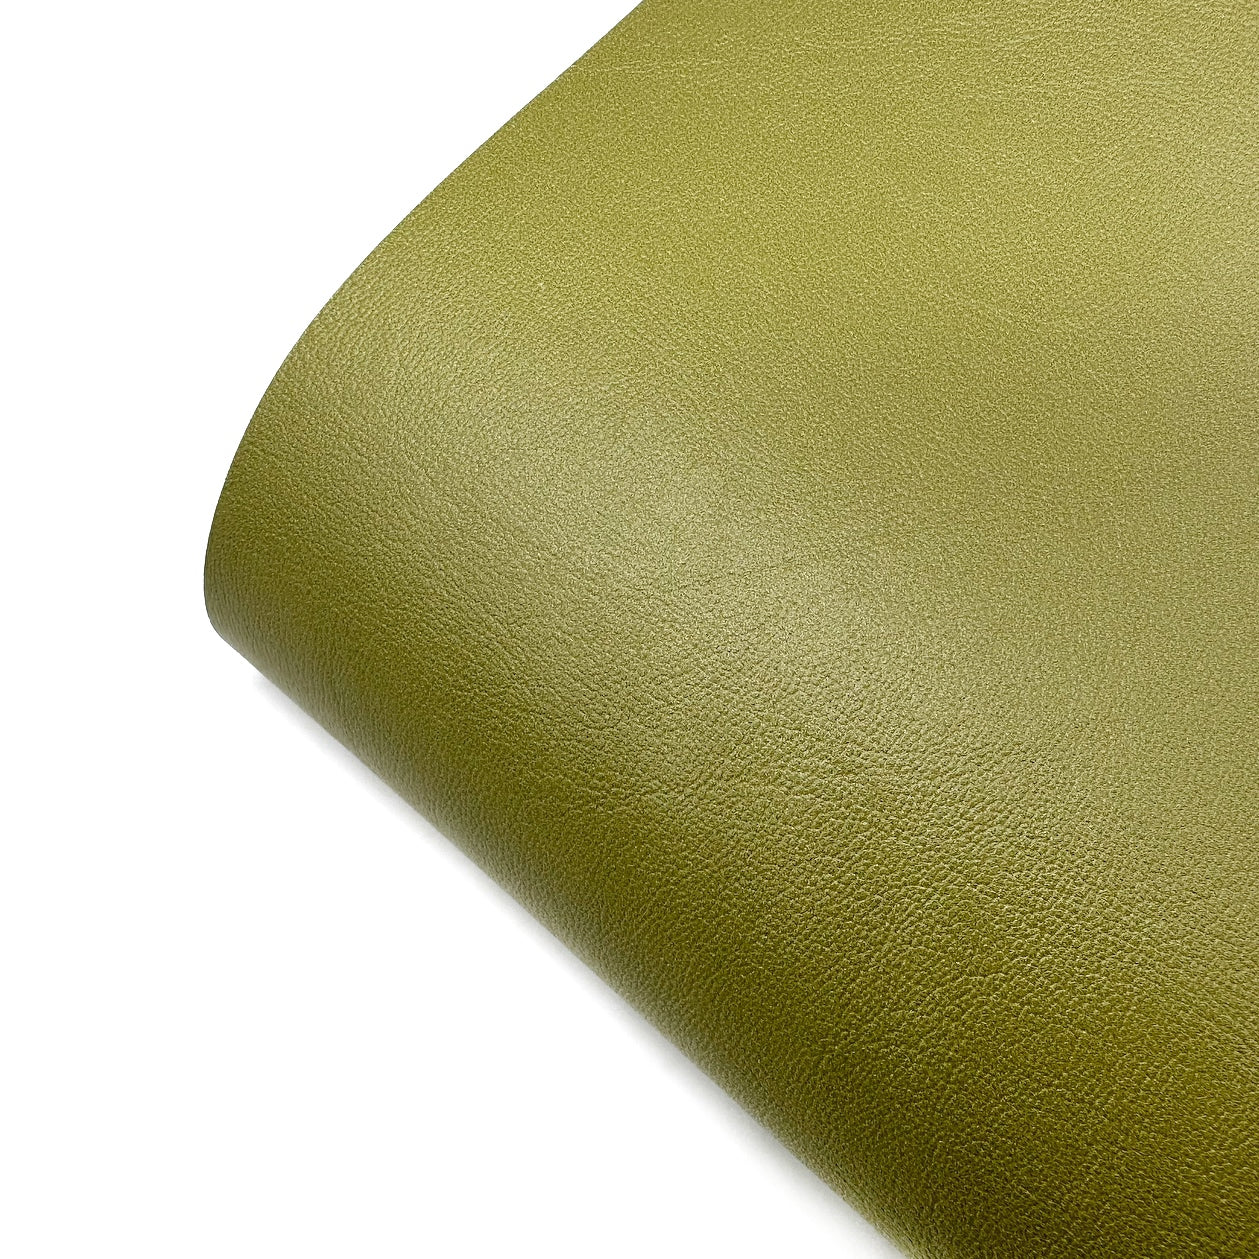 Olive Green Core Colour Premium Faux Leather Fabric Sheets